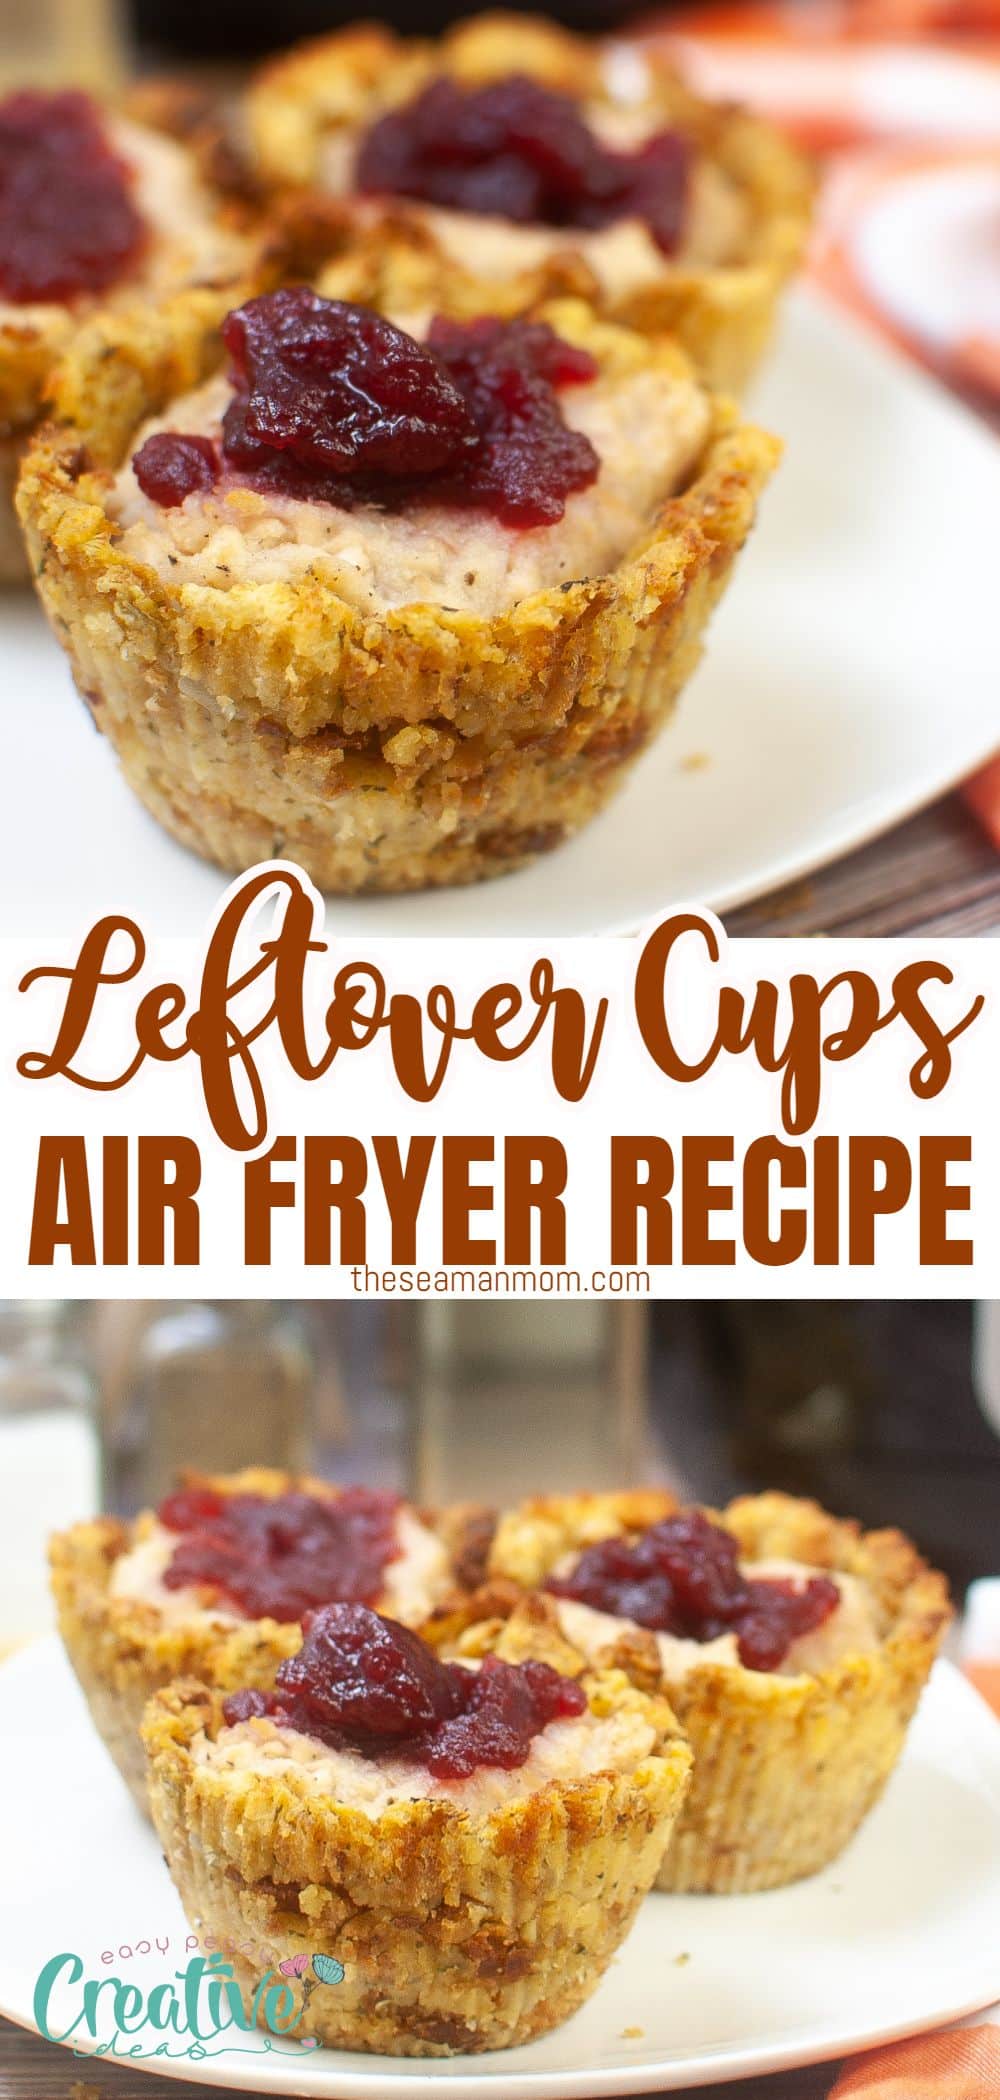 This Thanksgiving, don't let your turkey leftovers go to waste. Transform them into a delicious and easy meal with a simple, quick, and easy leftover turkey recipe in the air fryer. With just a few simple ingredients, you can have a hot and healthy meal on the table in no time. via @petroneagu